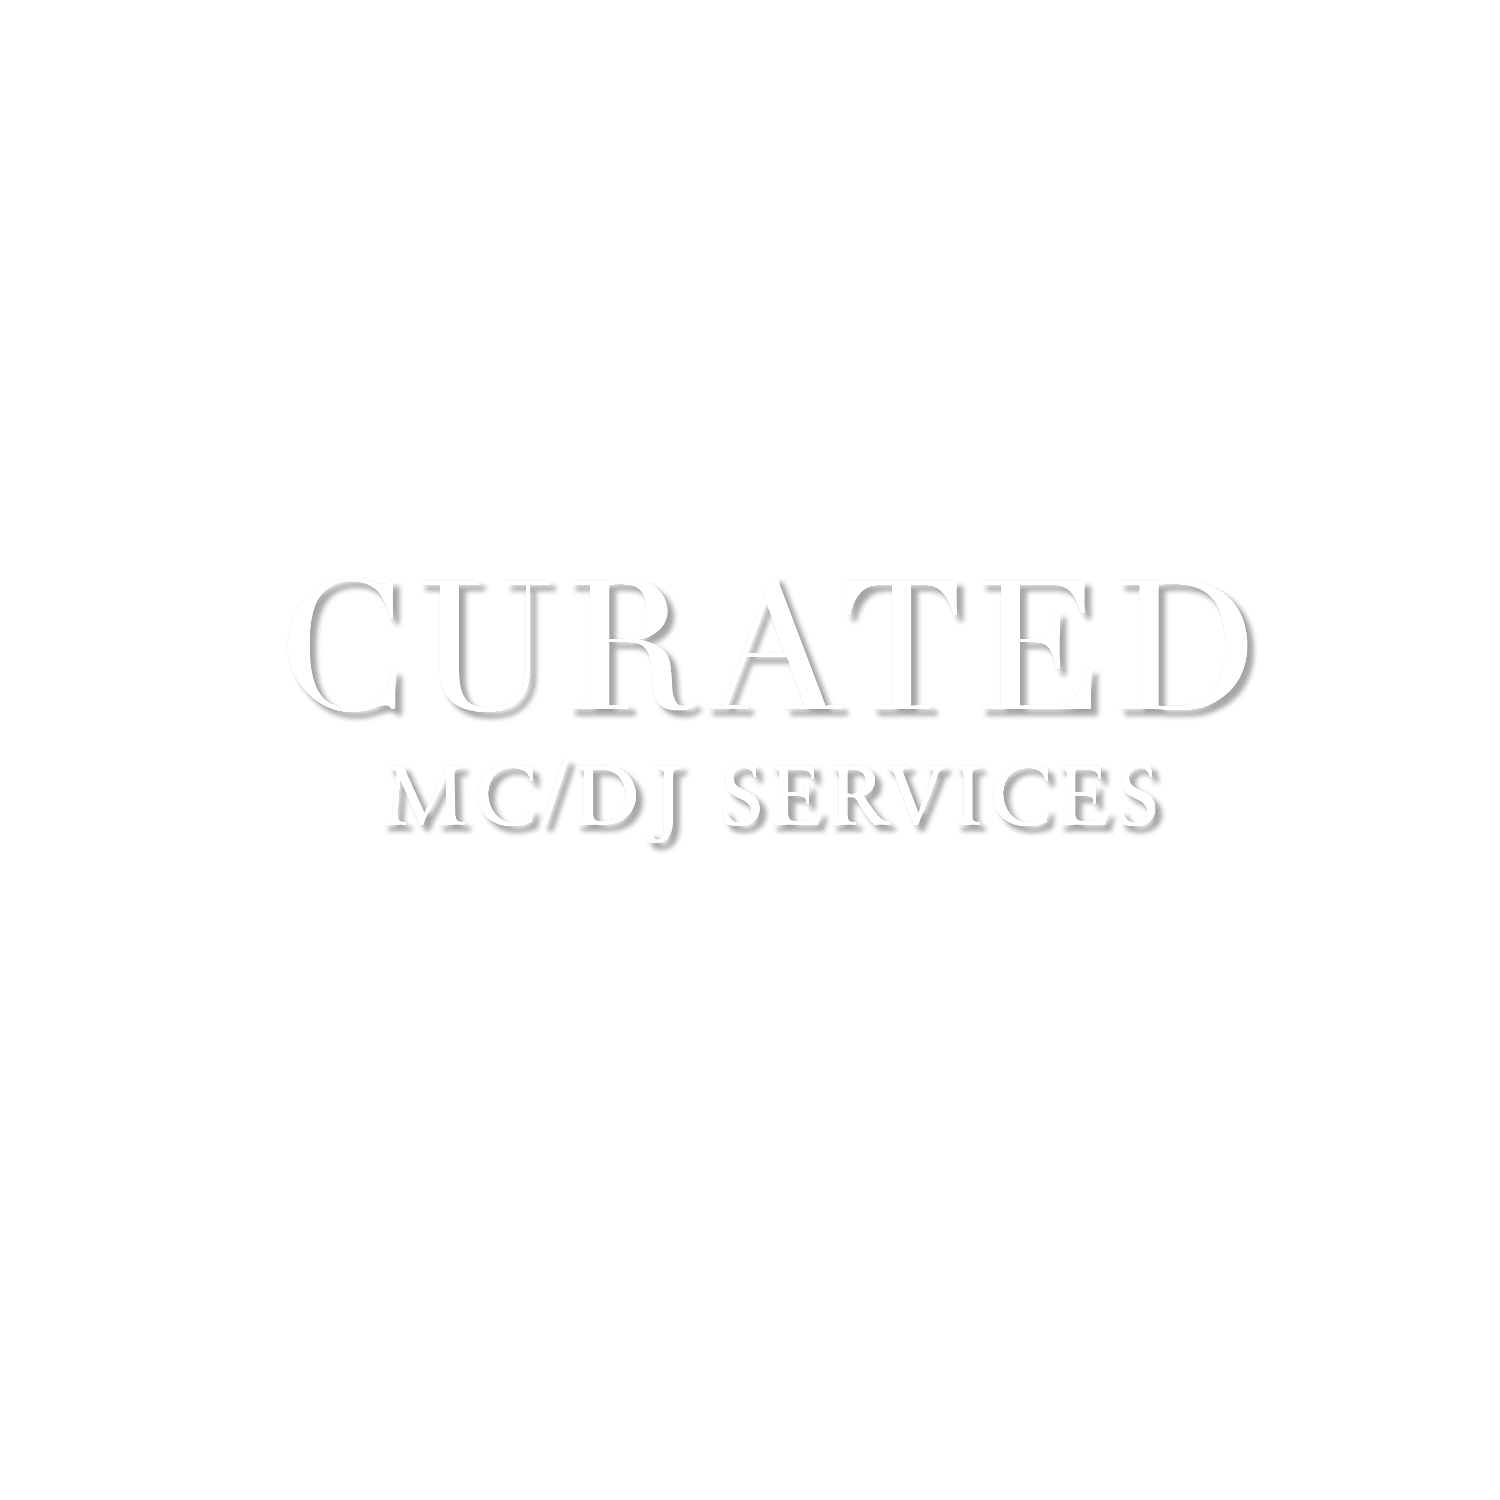 Curated MC/DJ SERVICES